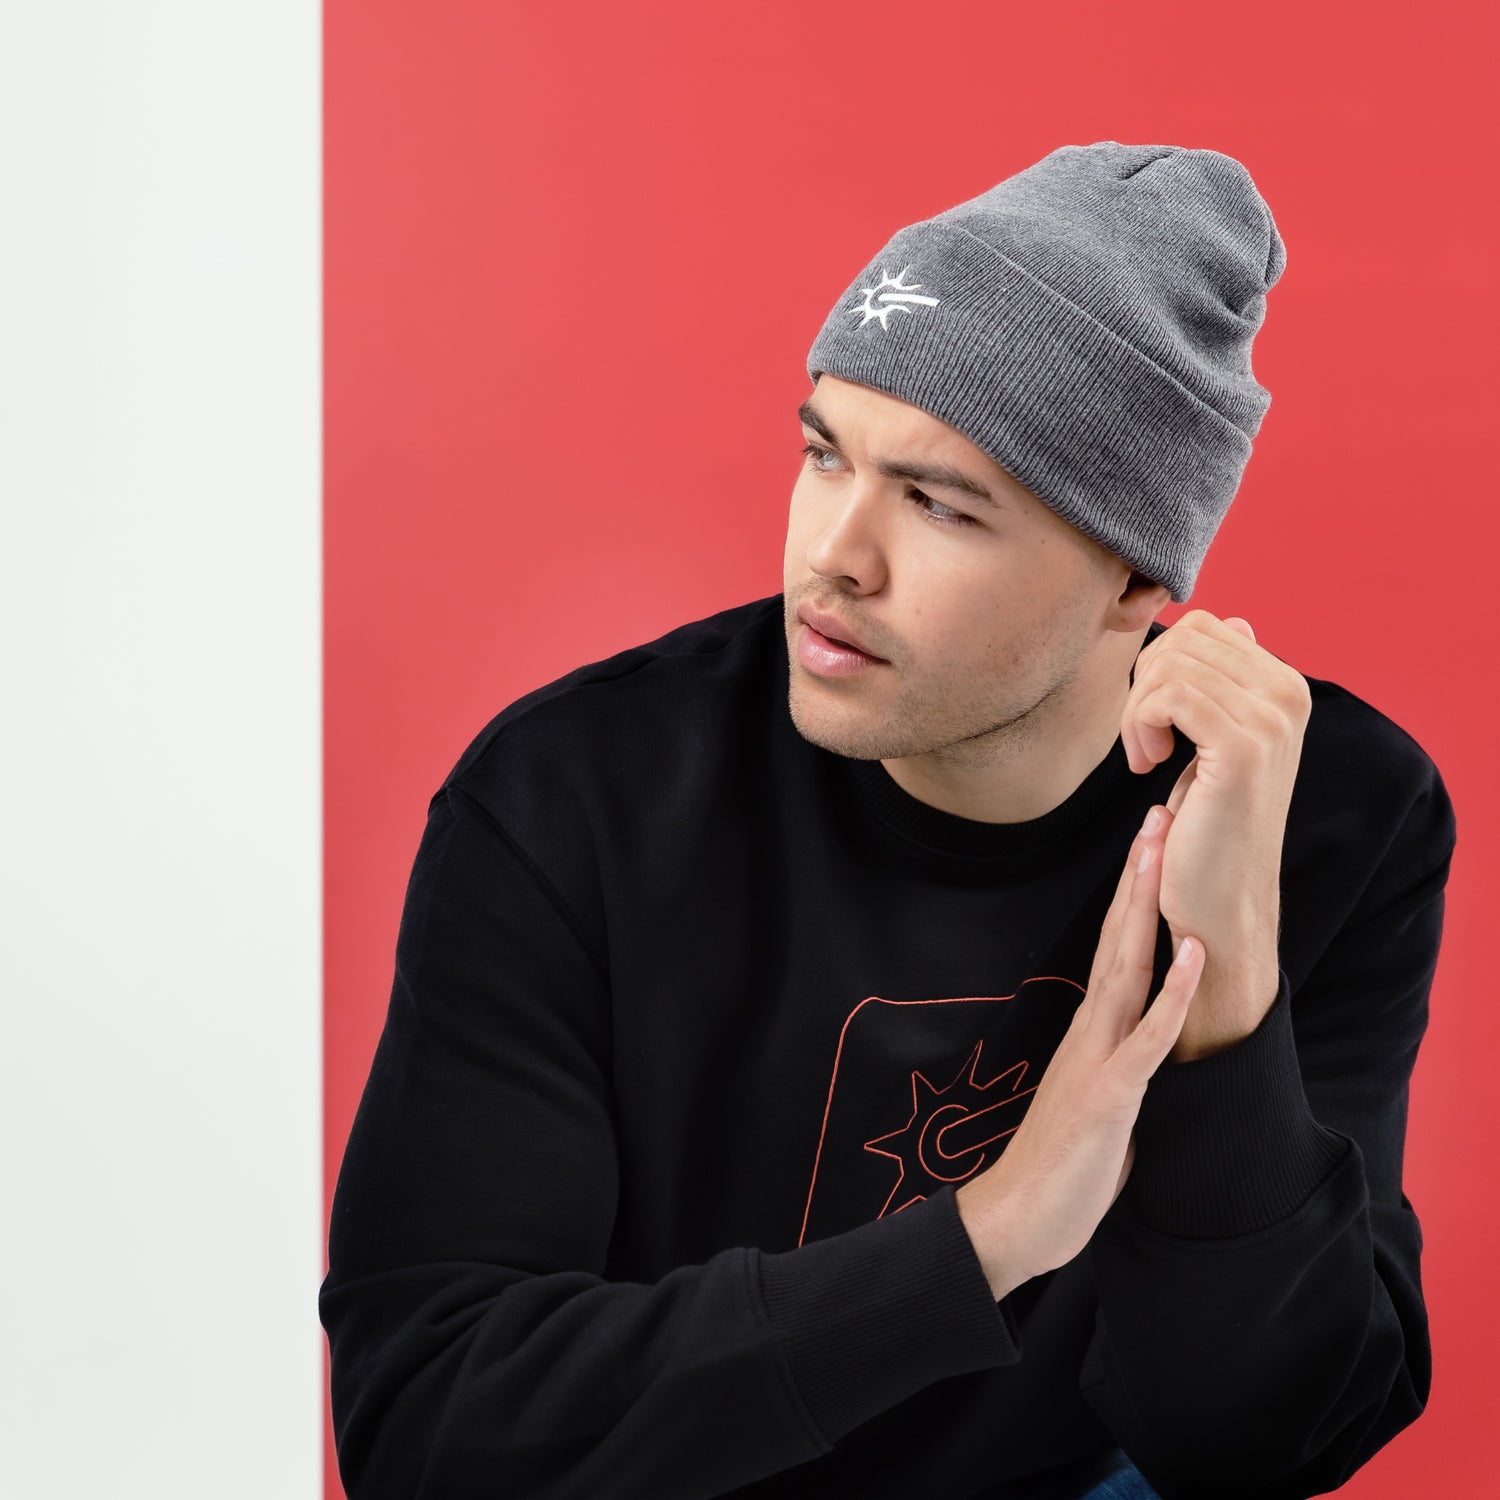 White male model wearing a gray beanie and a black sweatshirt by Rodeo.